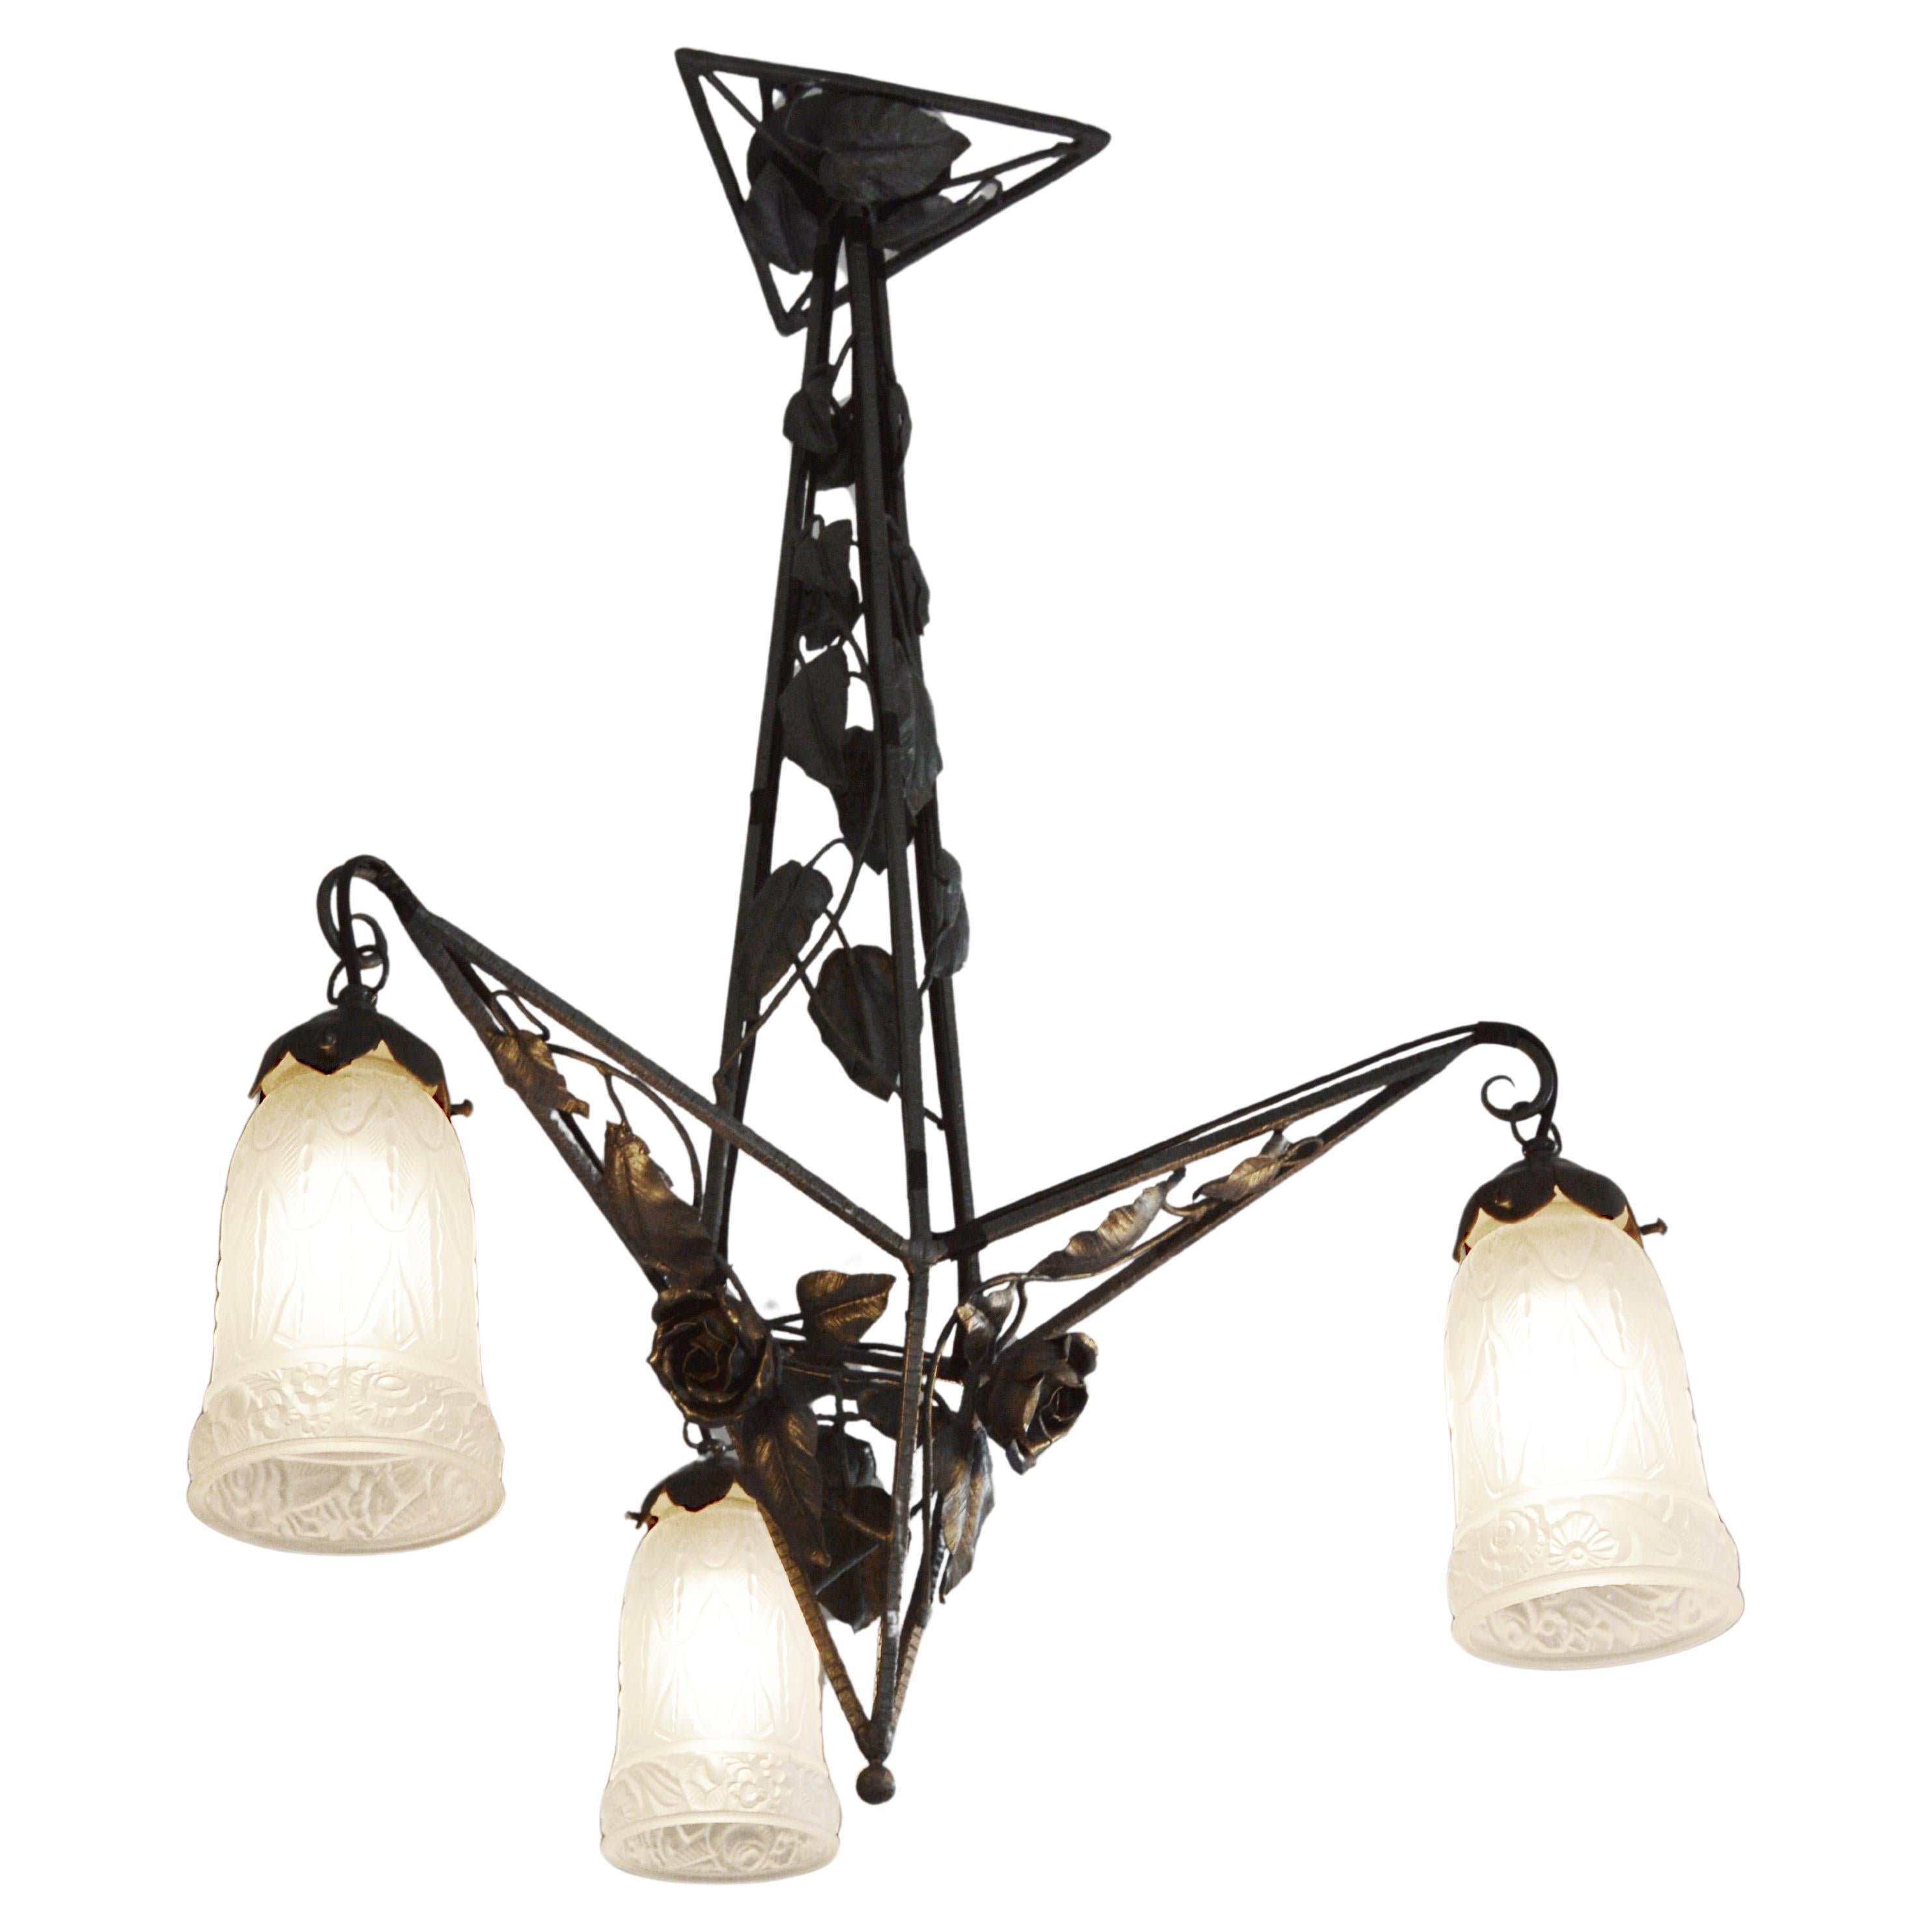 Petitot French Art Deco Wrought-Iron Chandelier, 1925 For Sale